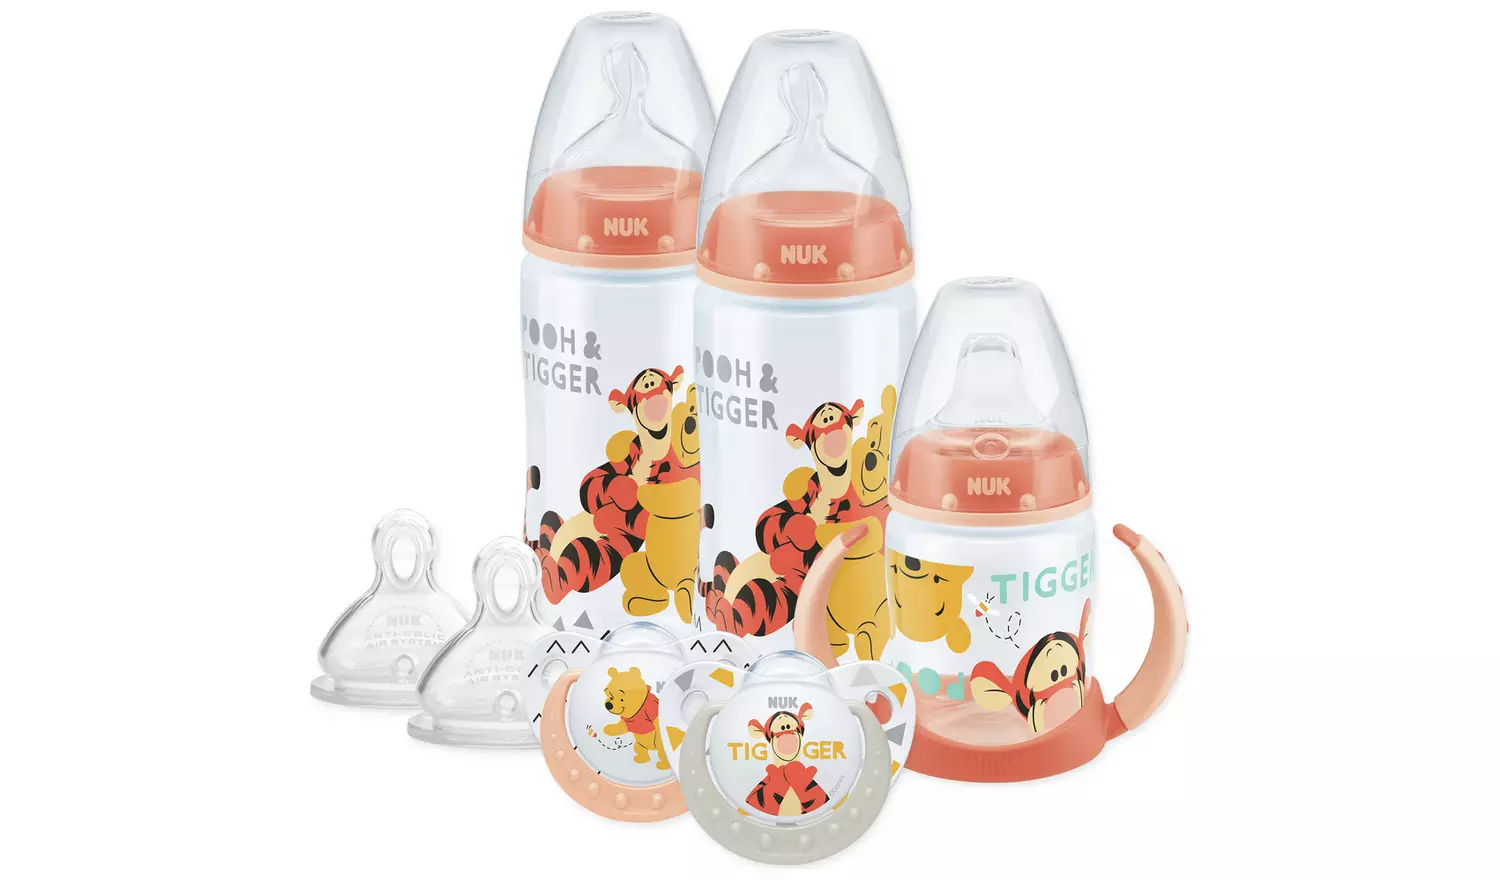 NUK Winnie the Pooh Bottle and Cup Set